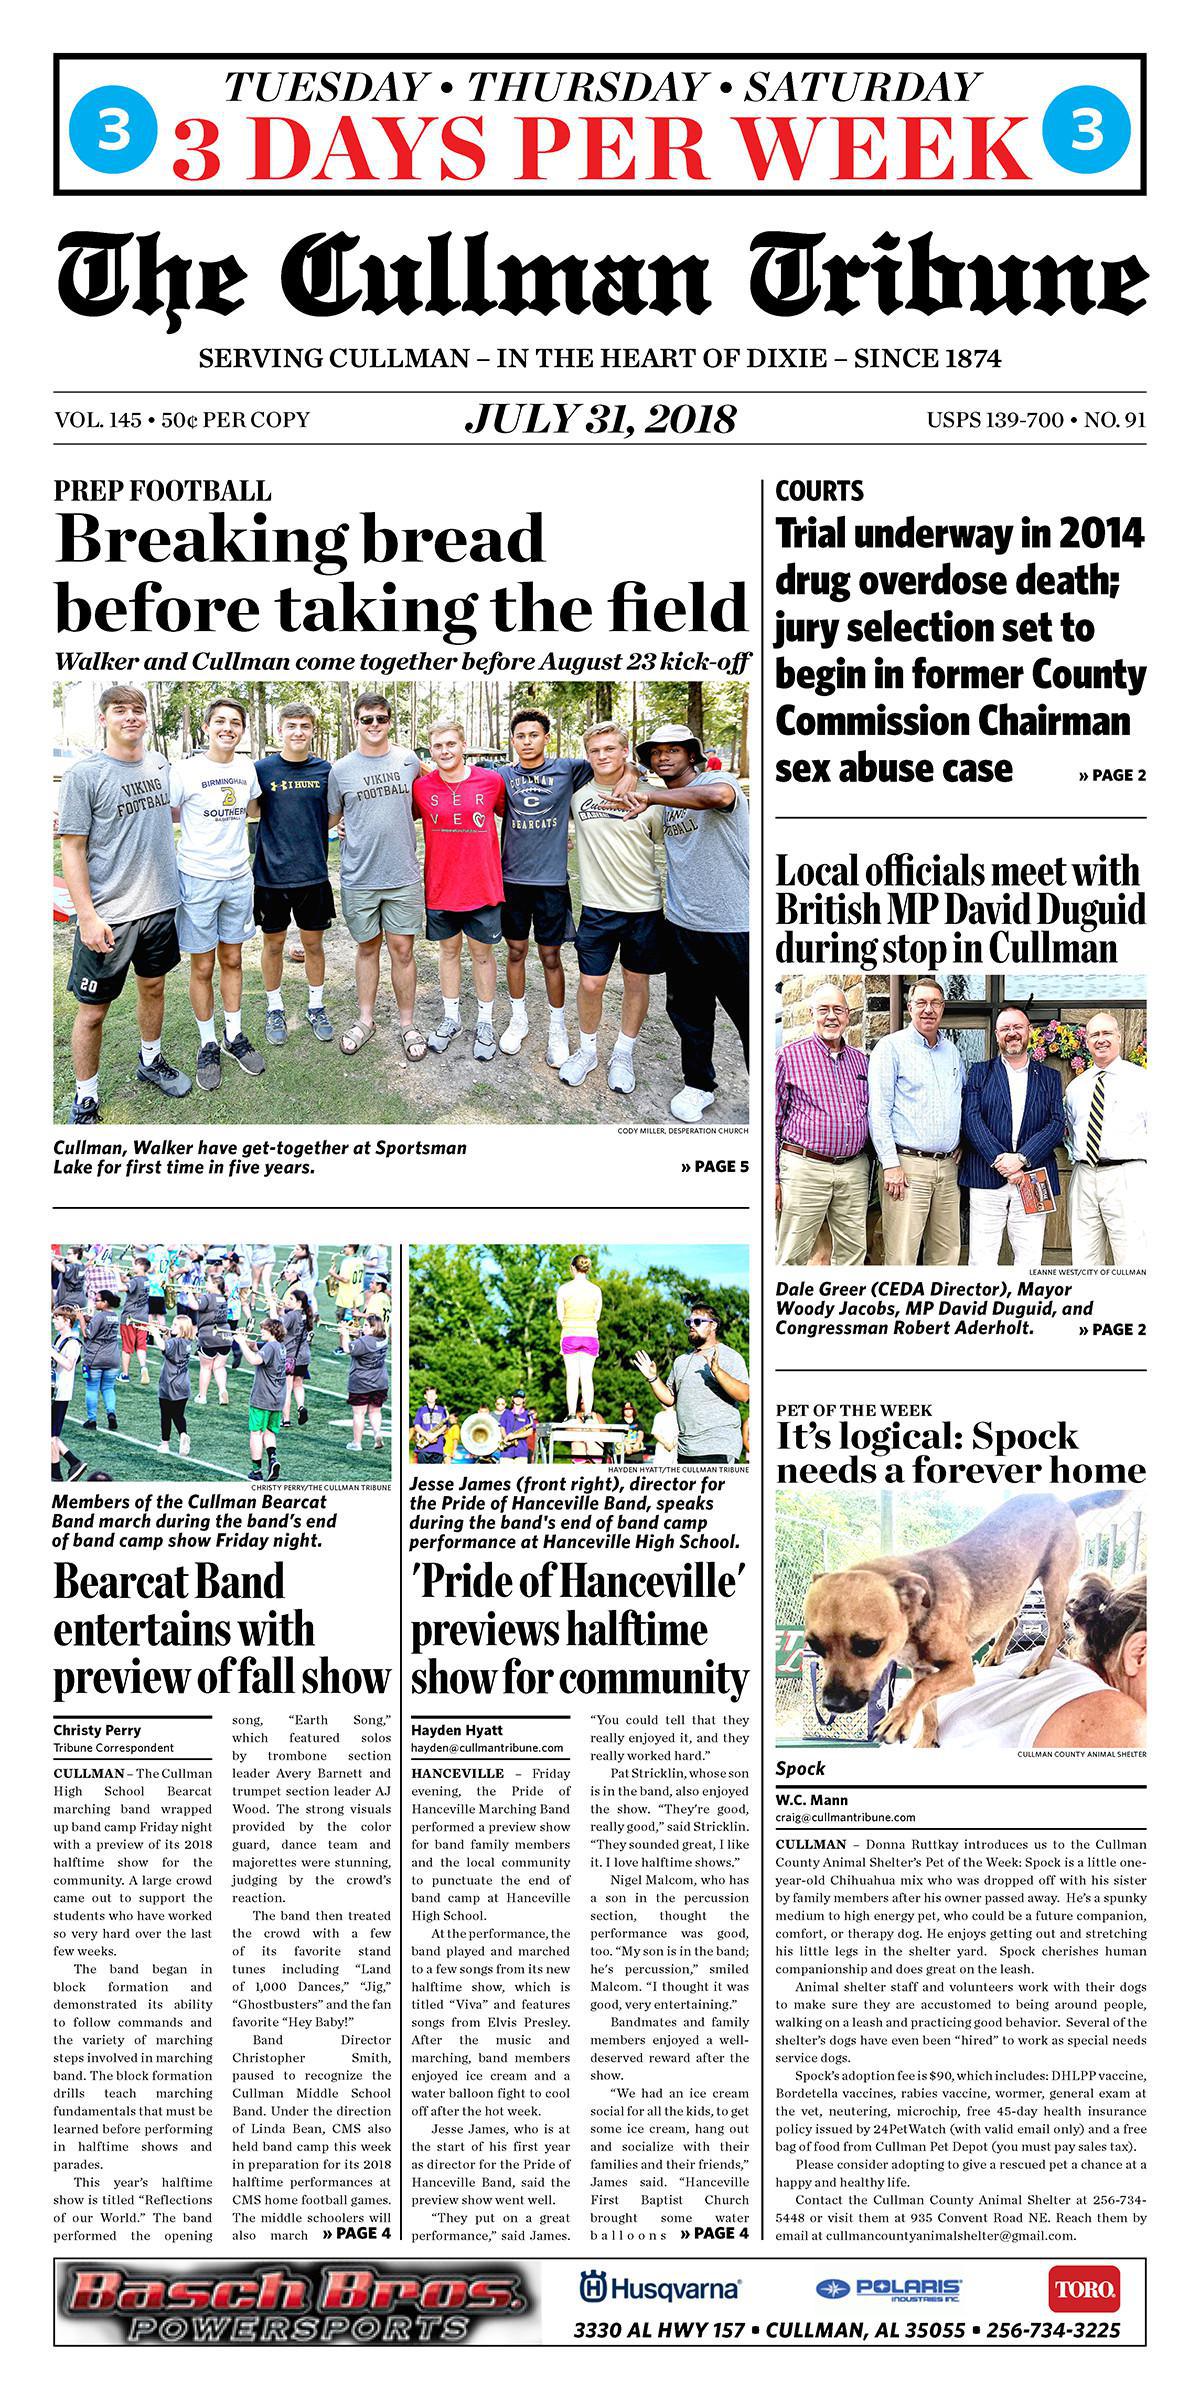 Good Morning Cullman! The 07-31-2018 edition of the Cullman Tribune is now ready to view